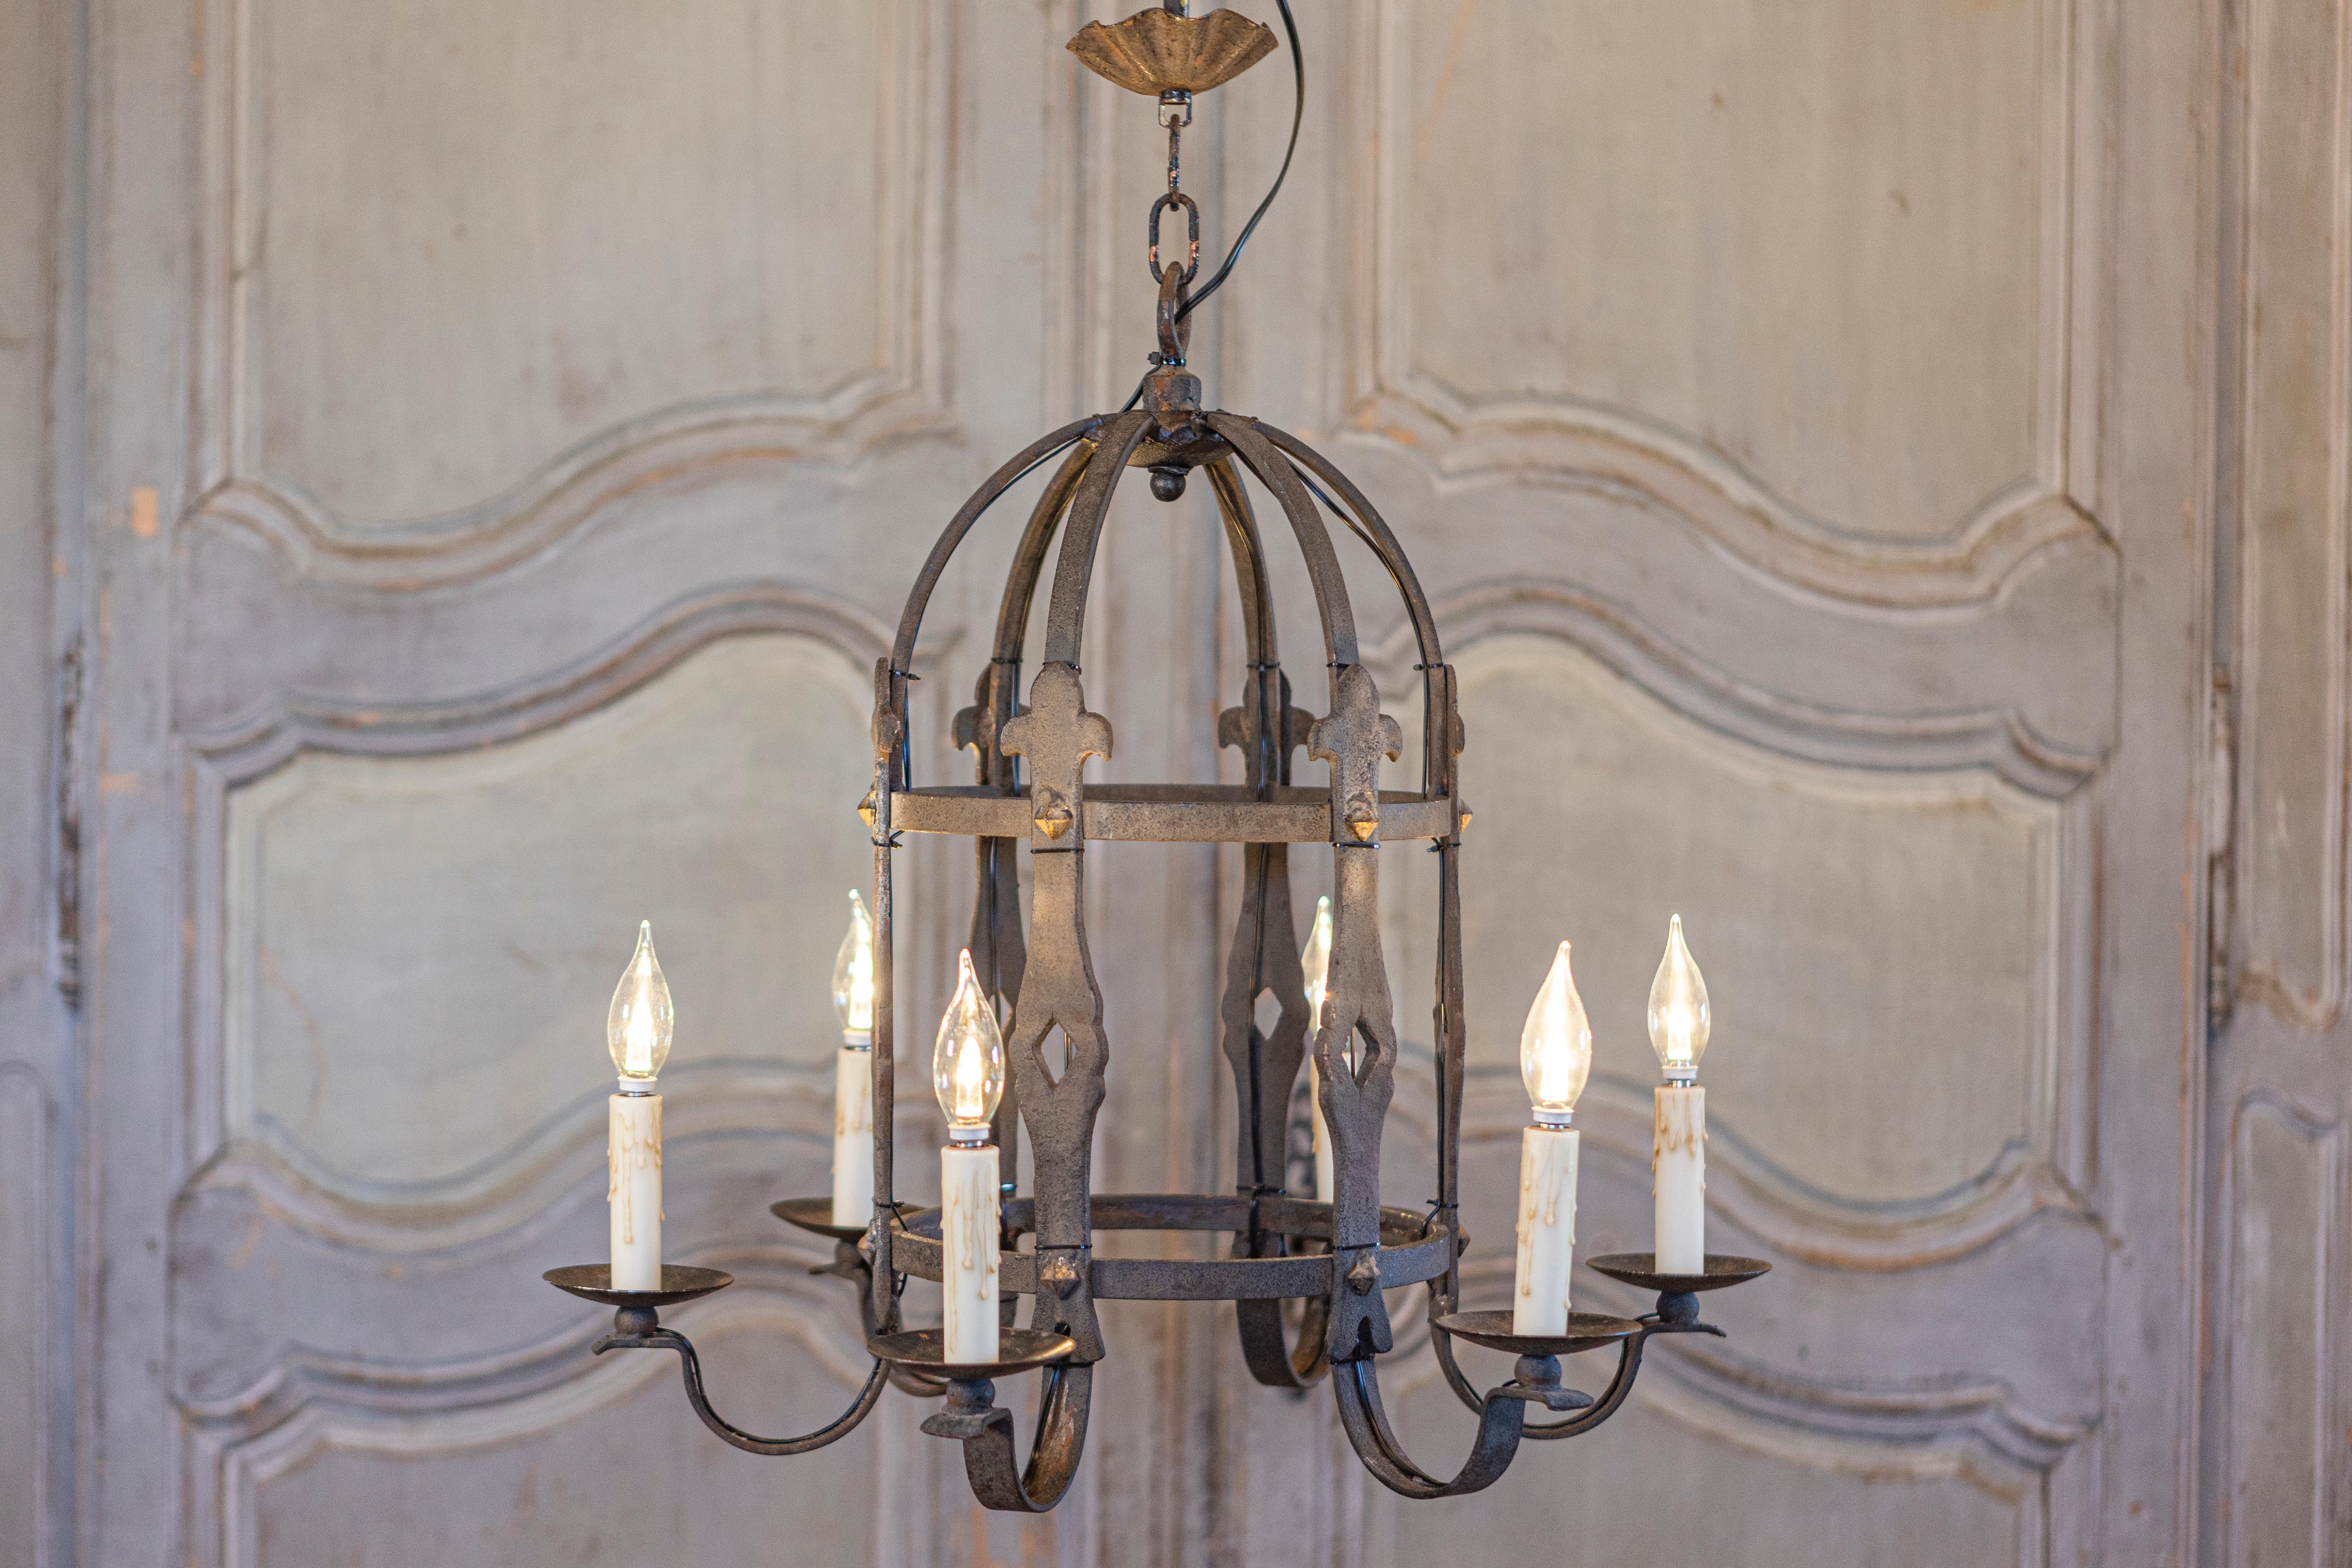 A French Gothic style cage shaped wrought iron chandelier from circa 1950 with six scrolling arms. This French Gothic style chandelier from circa 1950 is masterfully crafted from wrought iron, featuring a cage-like silhouette with six elegantly